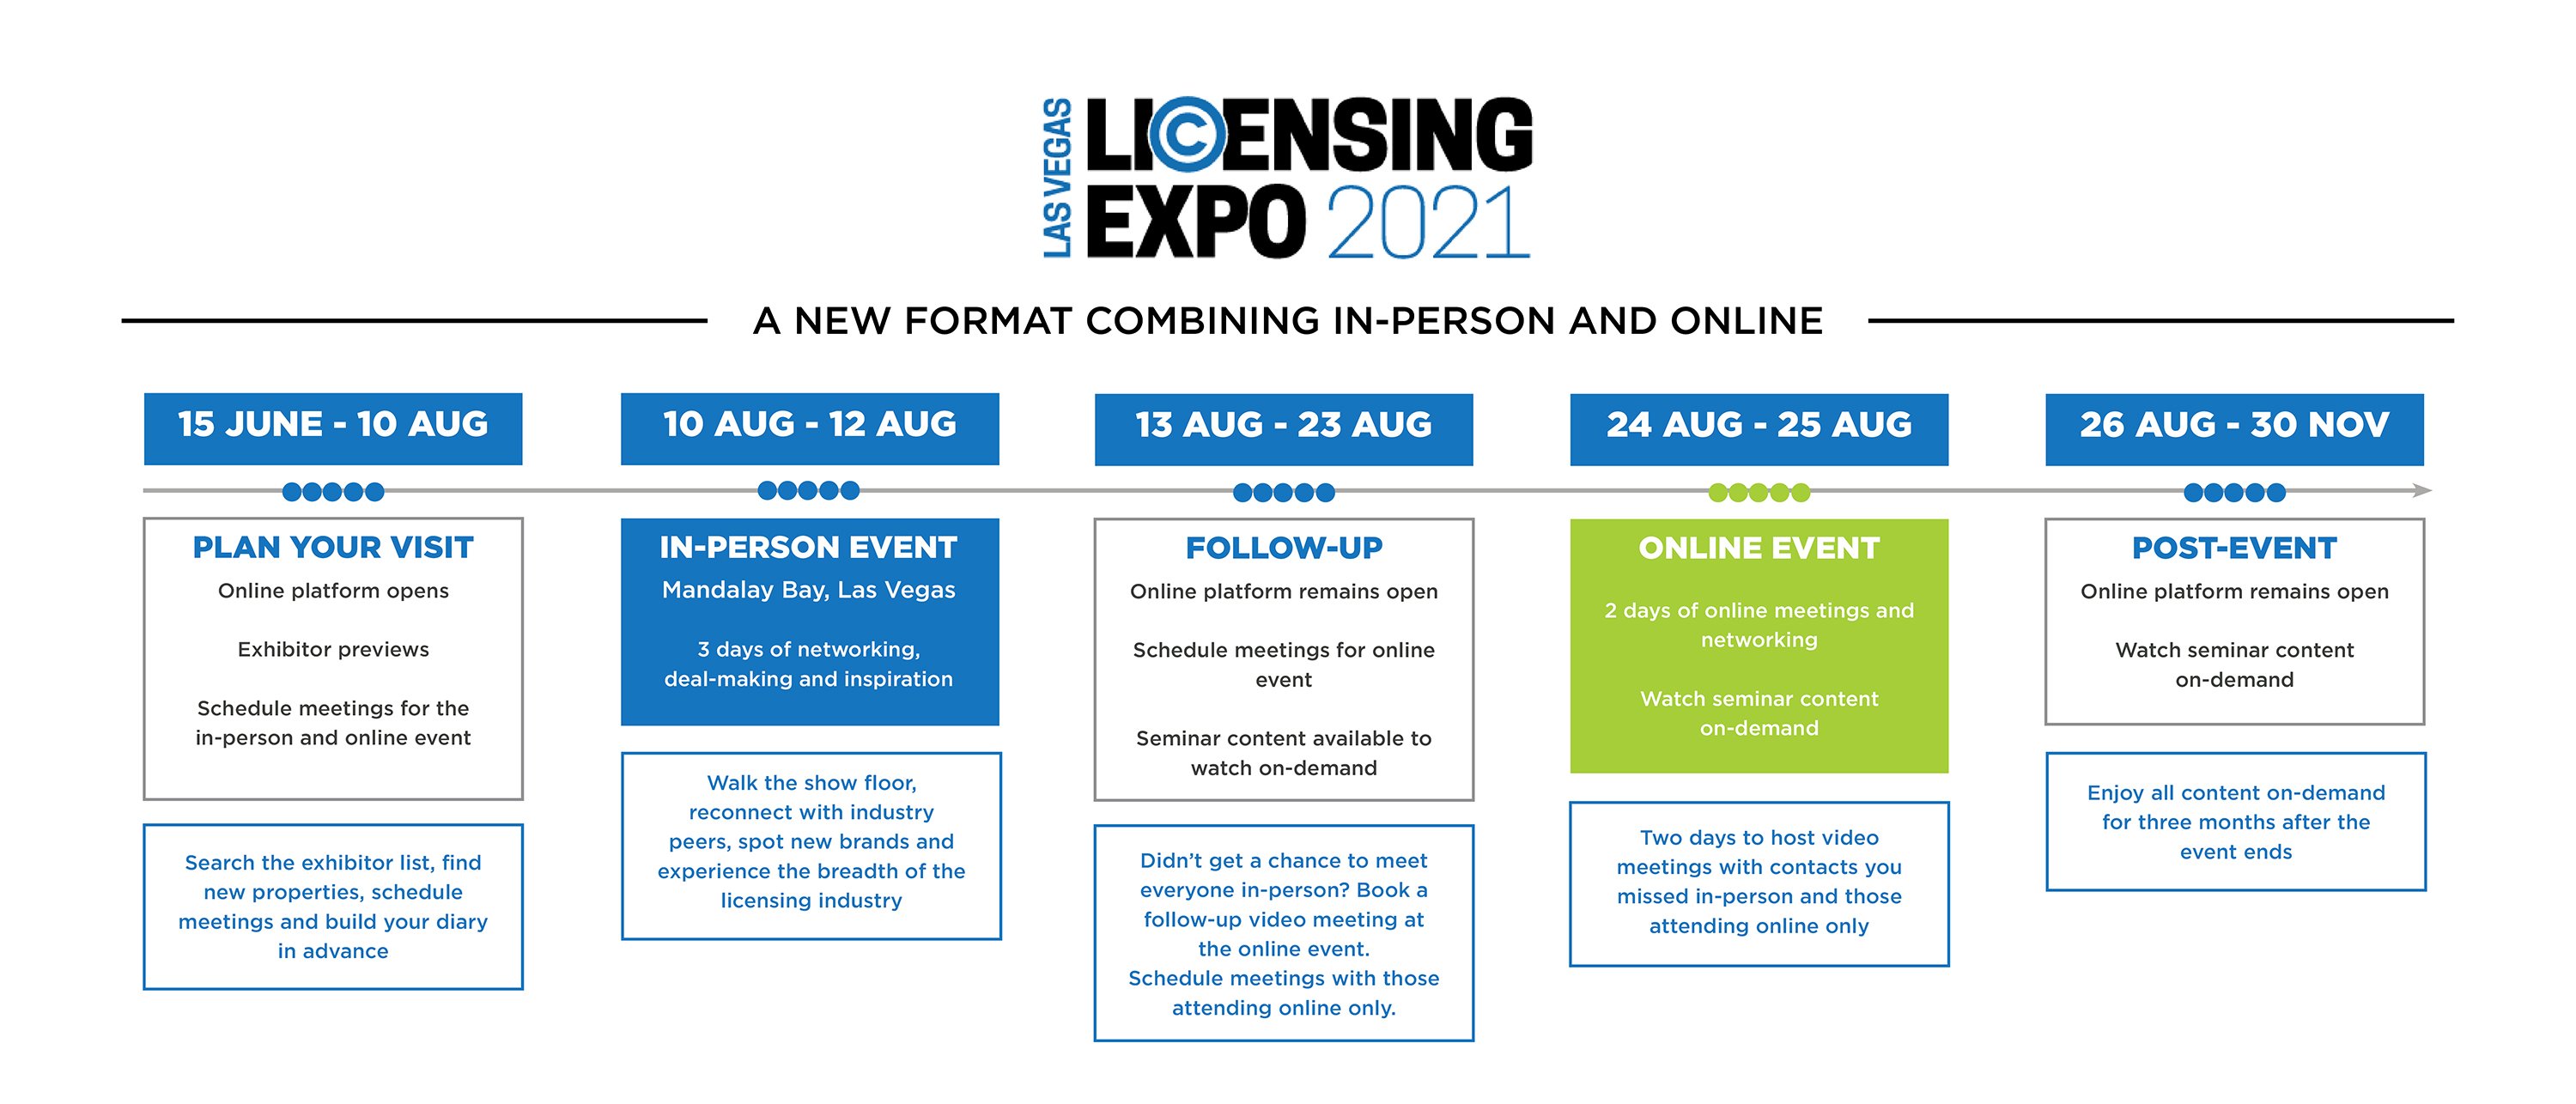 Licensing Expo and Brand Licensing Europe Confirm New 2021 Dates and